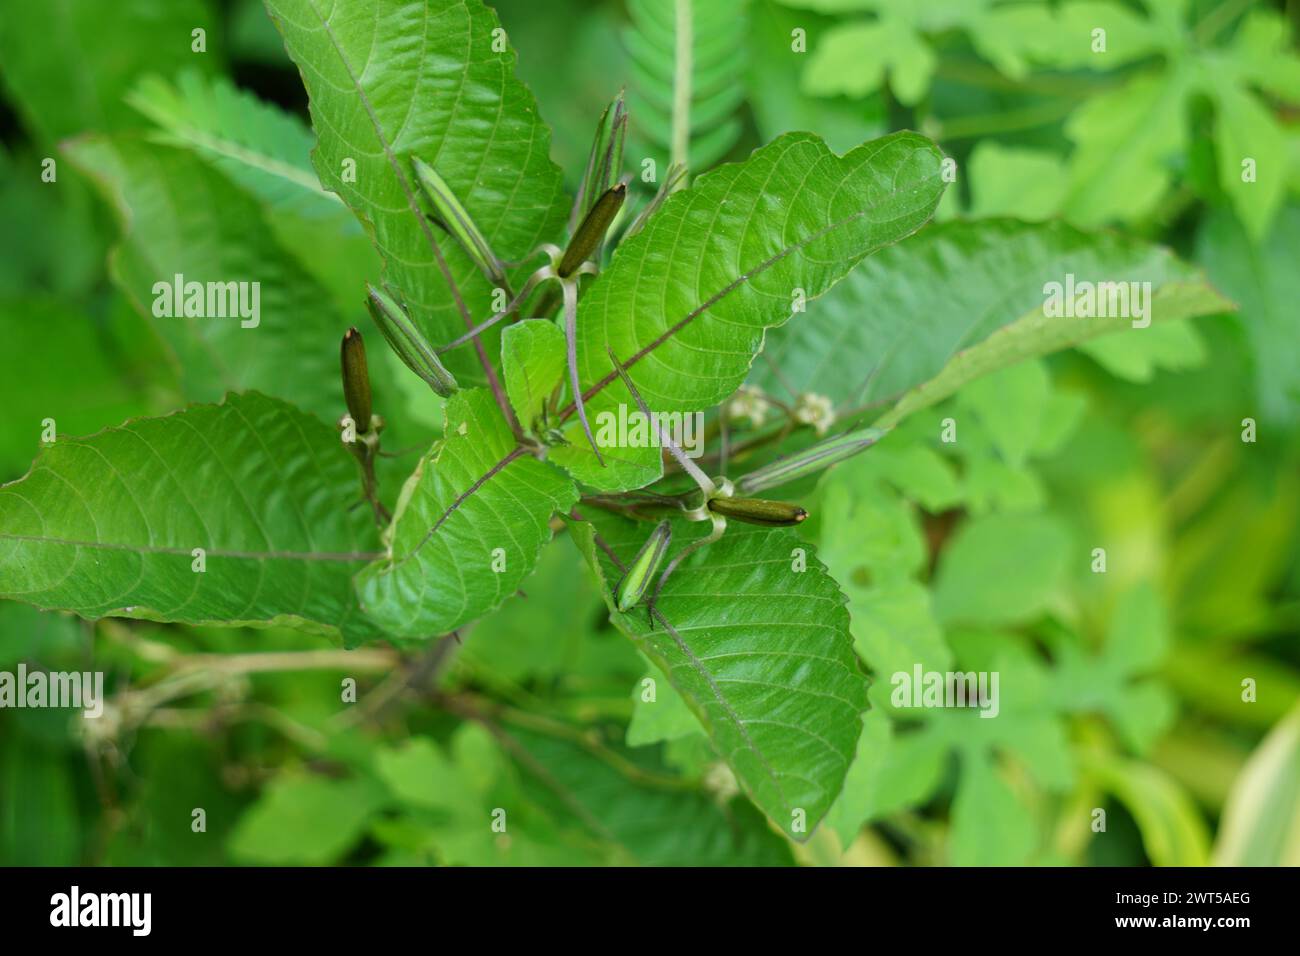 Ruellia tuberosa (also known as minnieroot, fever root, snapdragon root) with a natural background Stock Photo